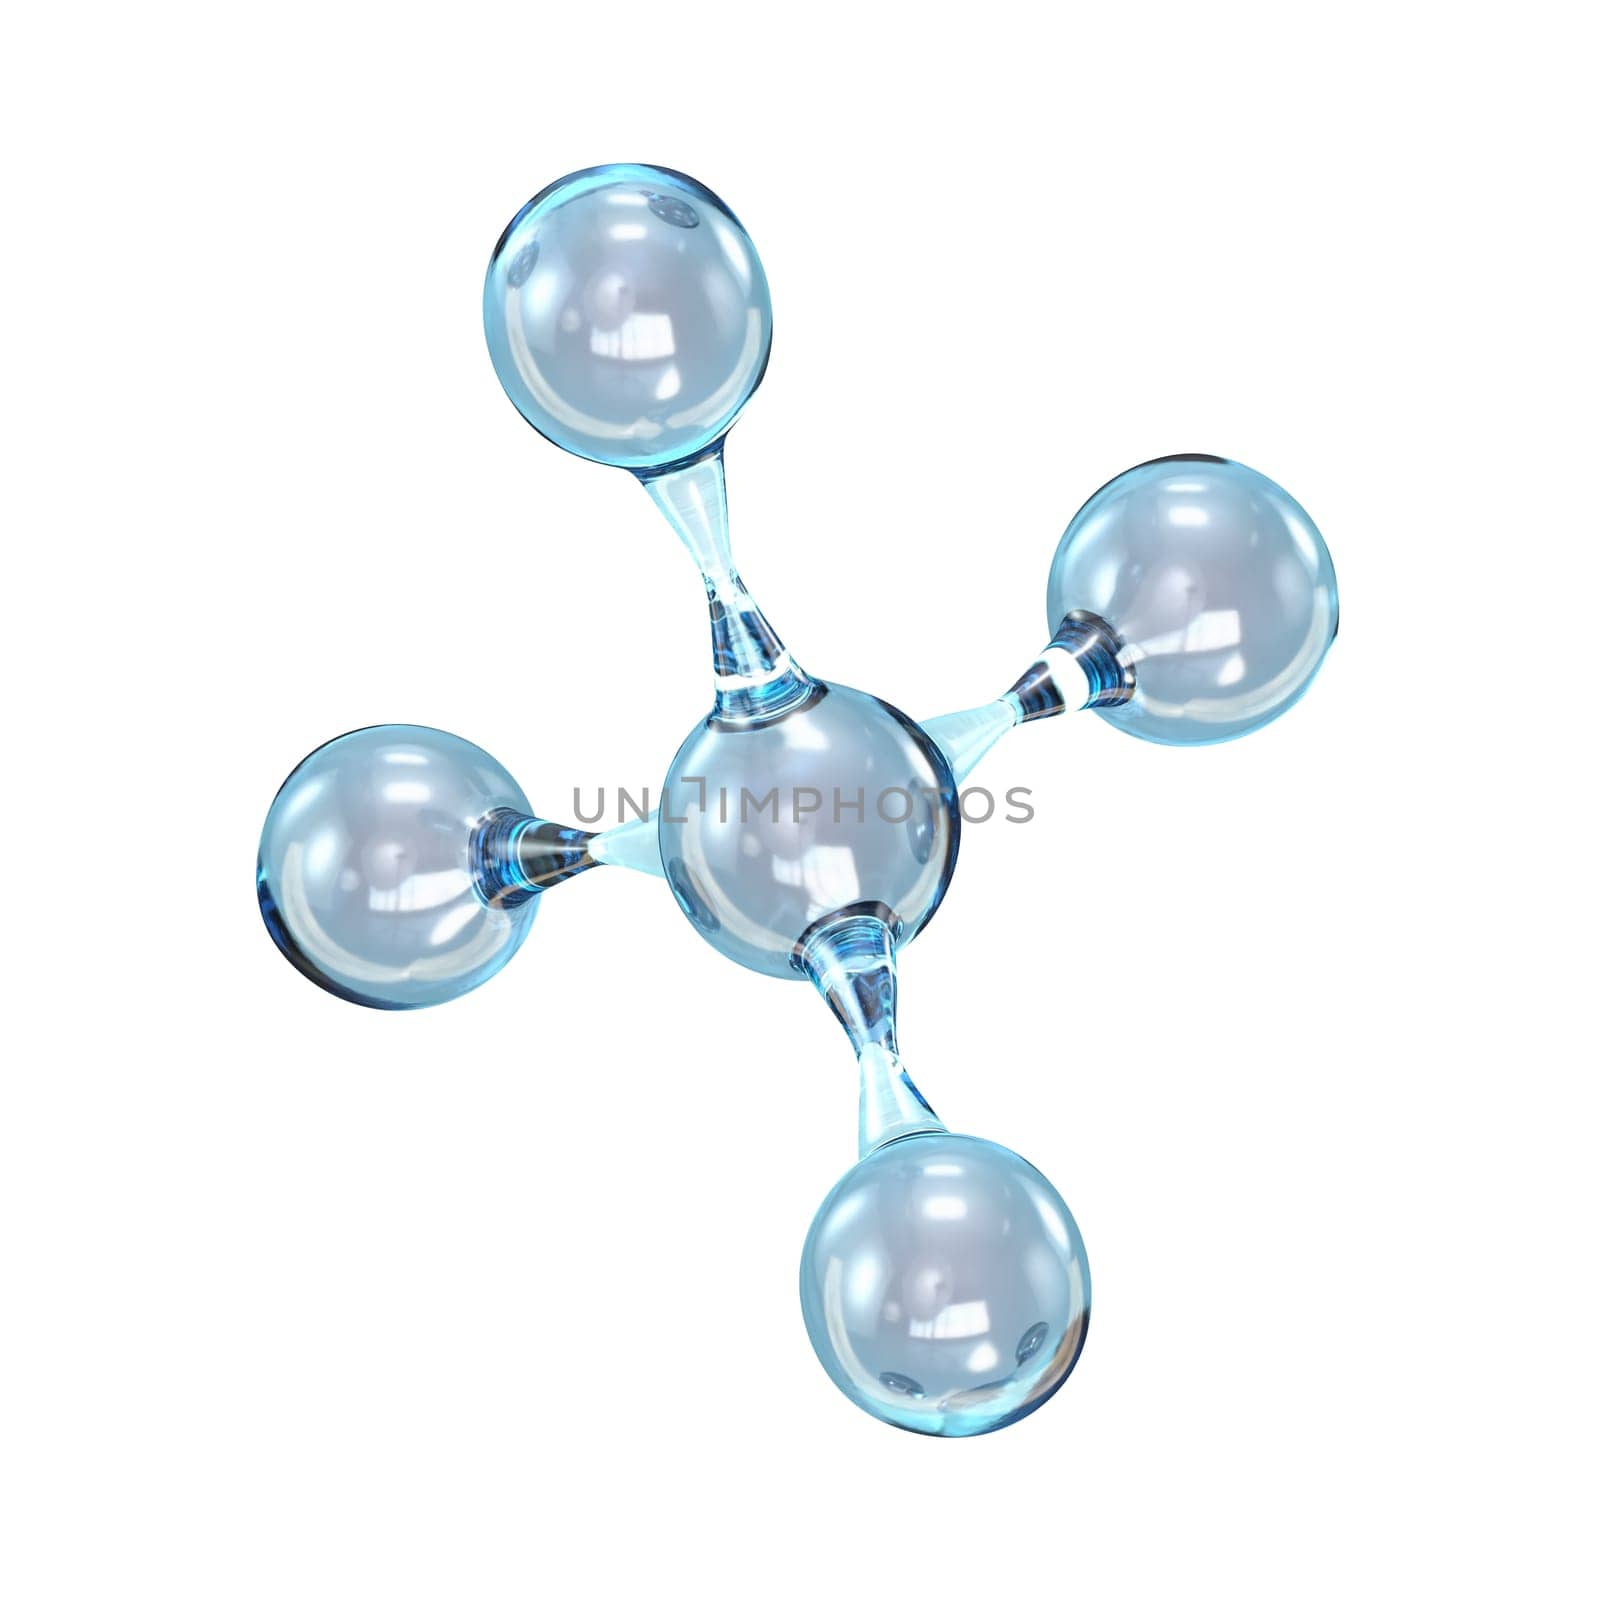 Glass molecule model 3D rendering illustration isolated on white background